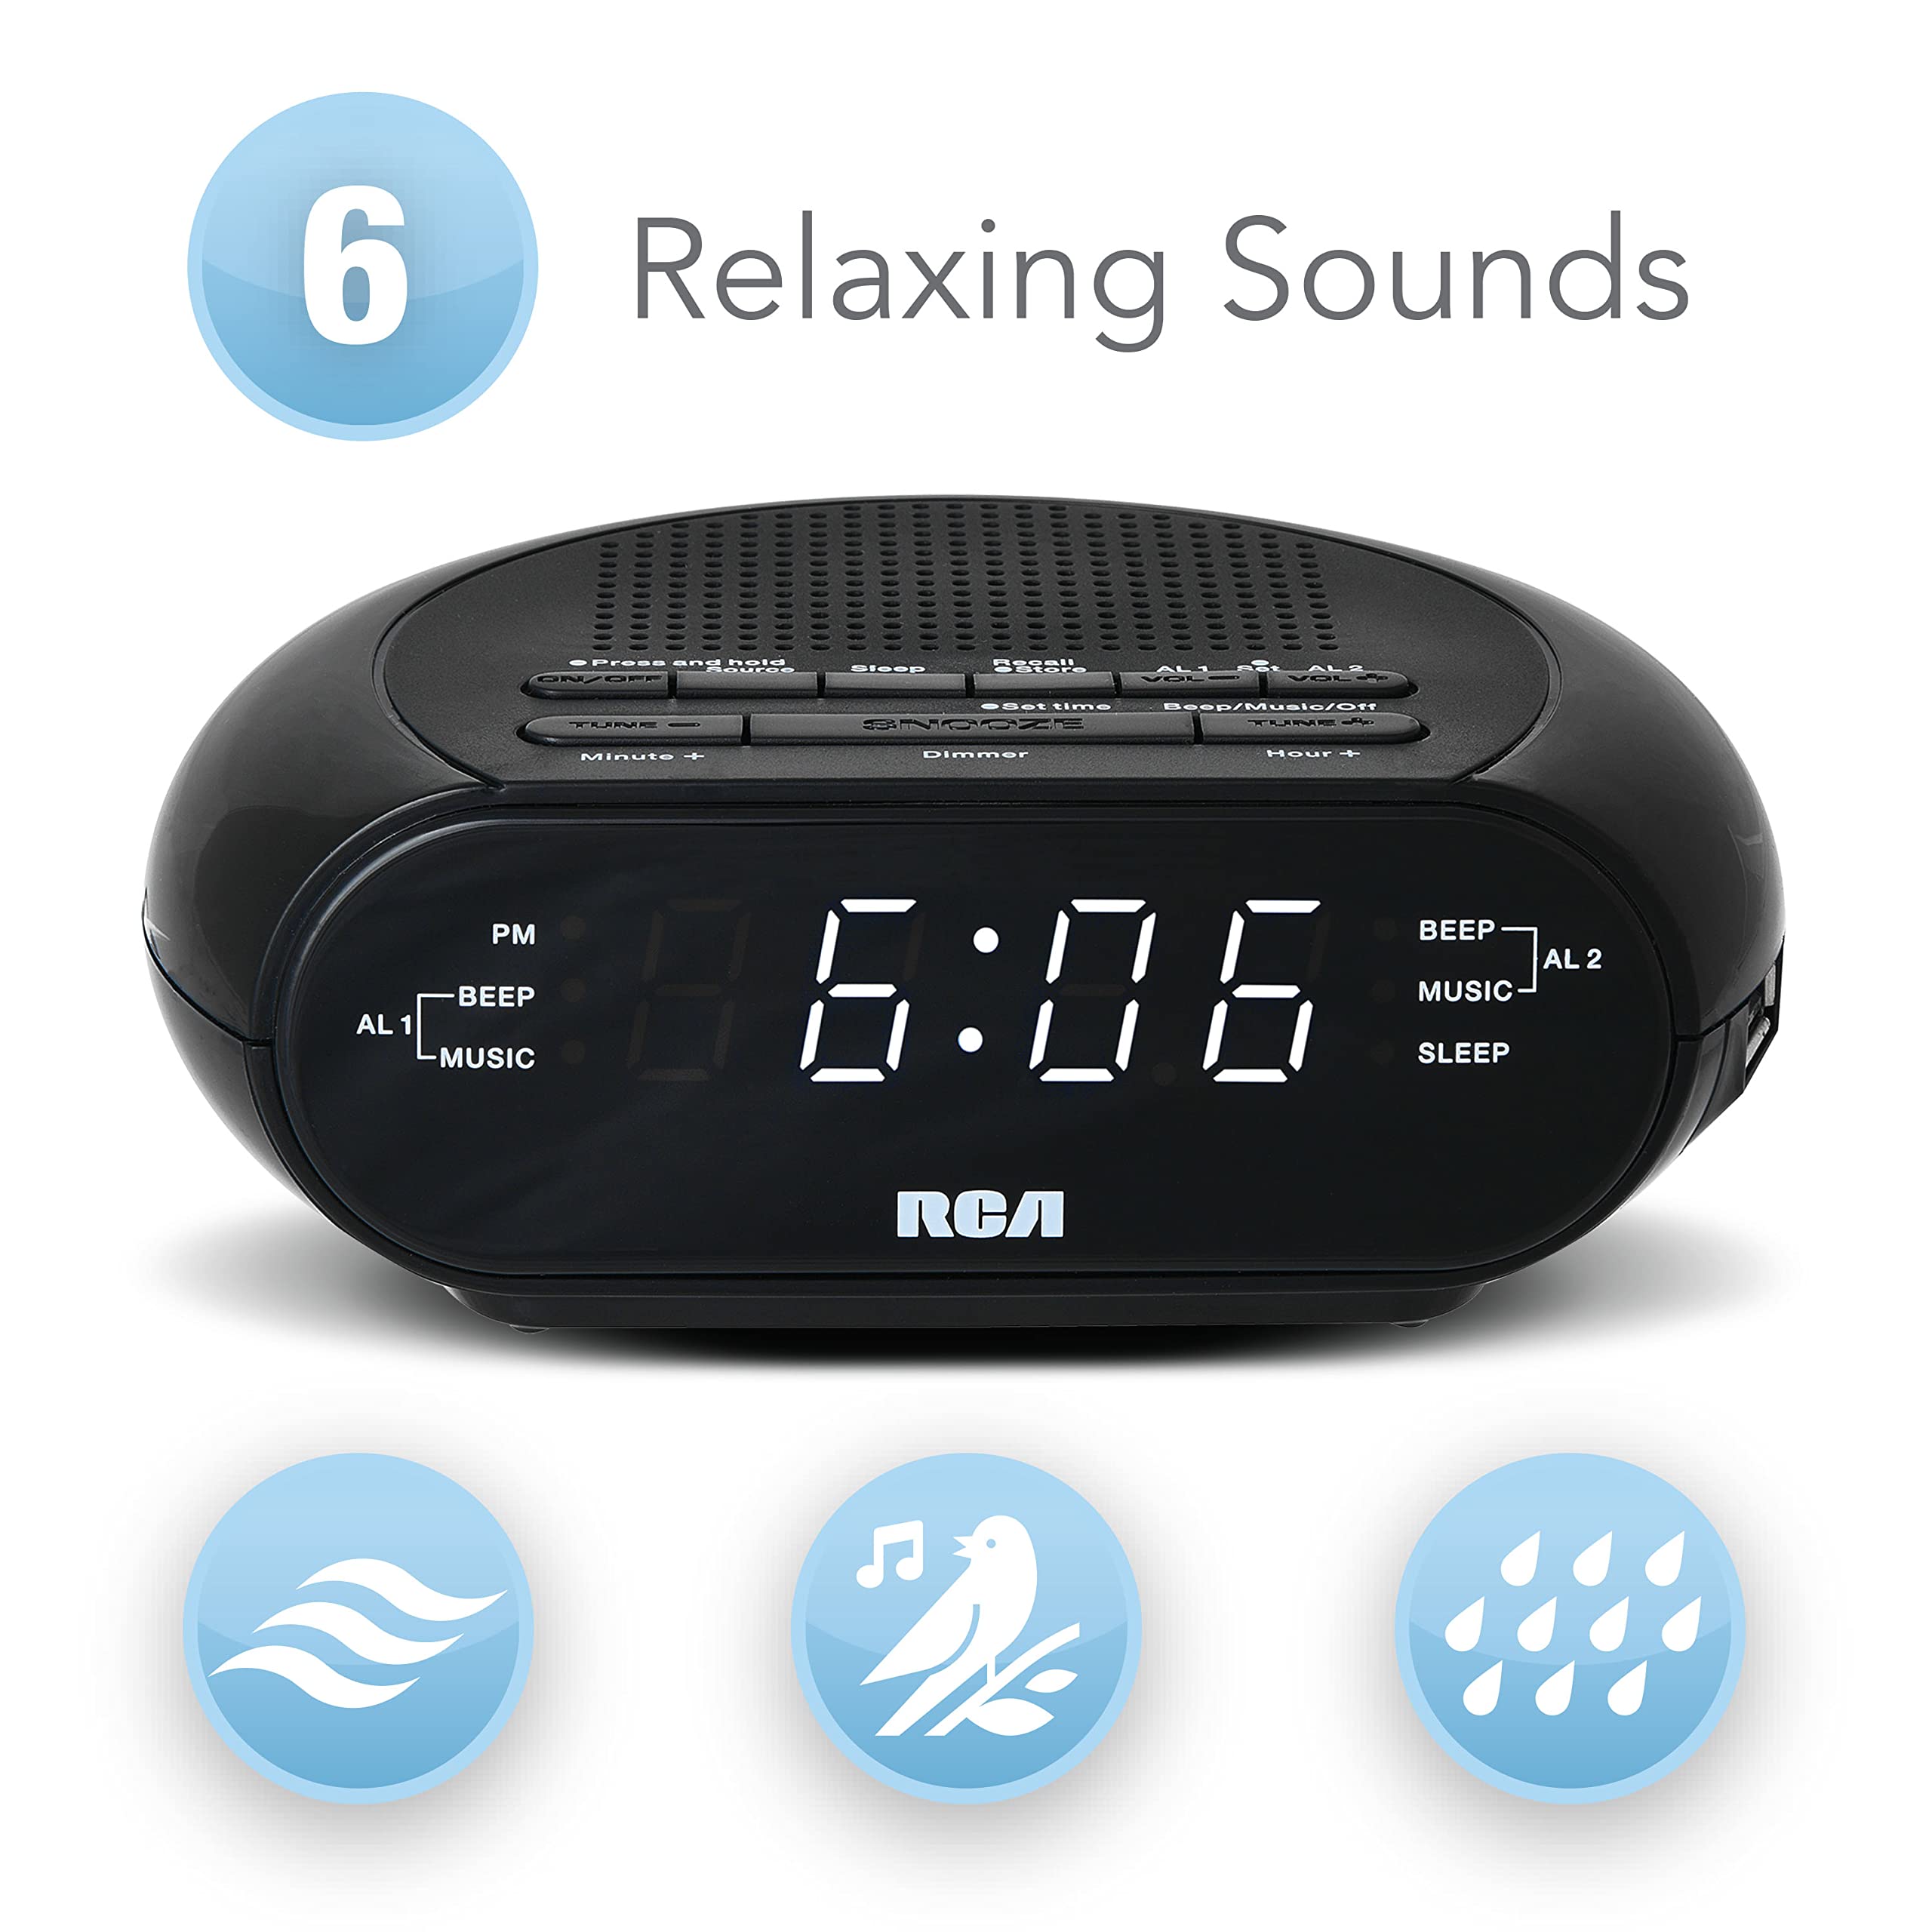 RCA RCS27 Digital Radio Alarm Clock with Soothing Sounds, Brightness Control, and USB Charging Port